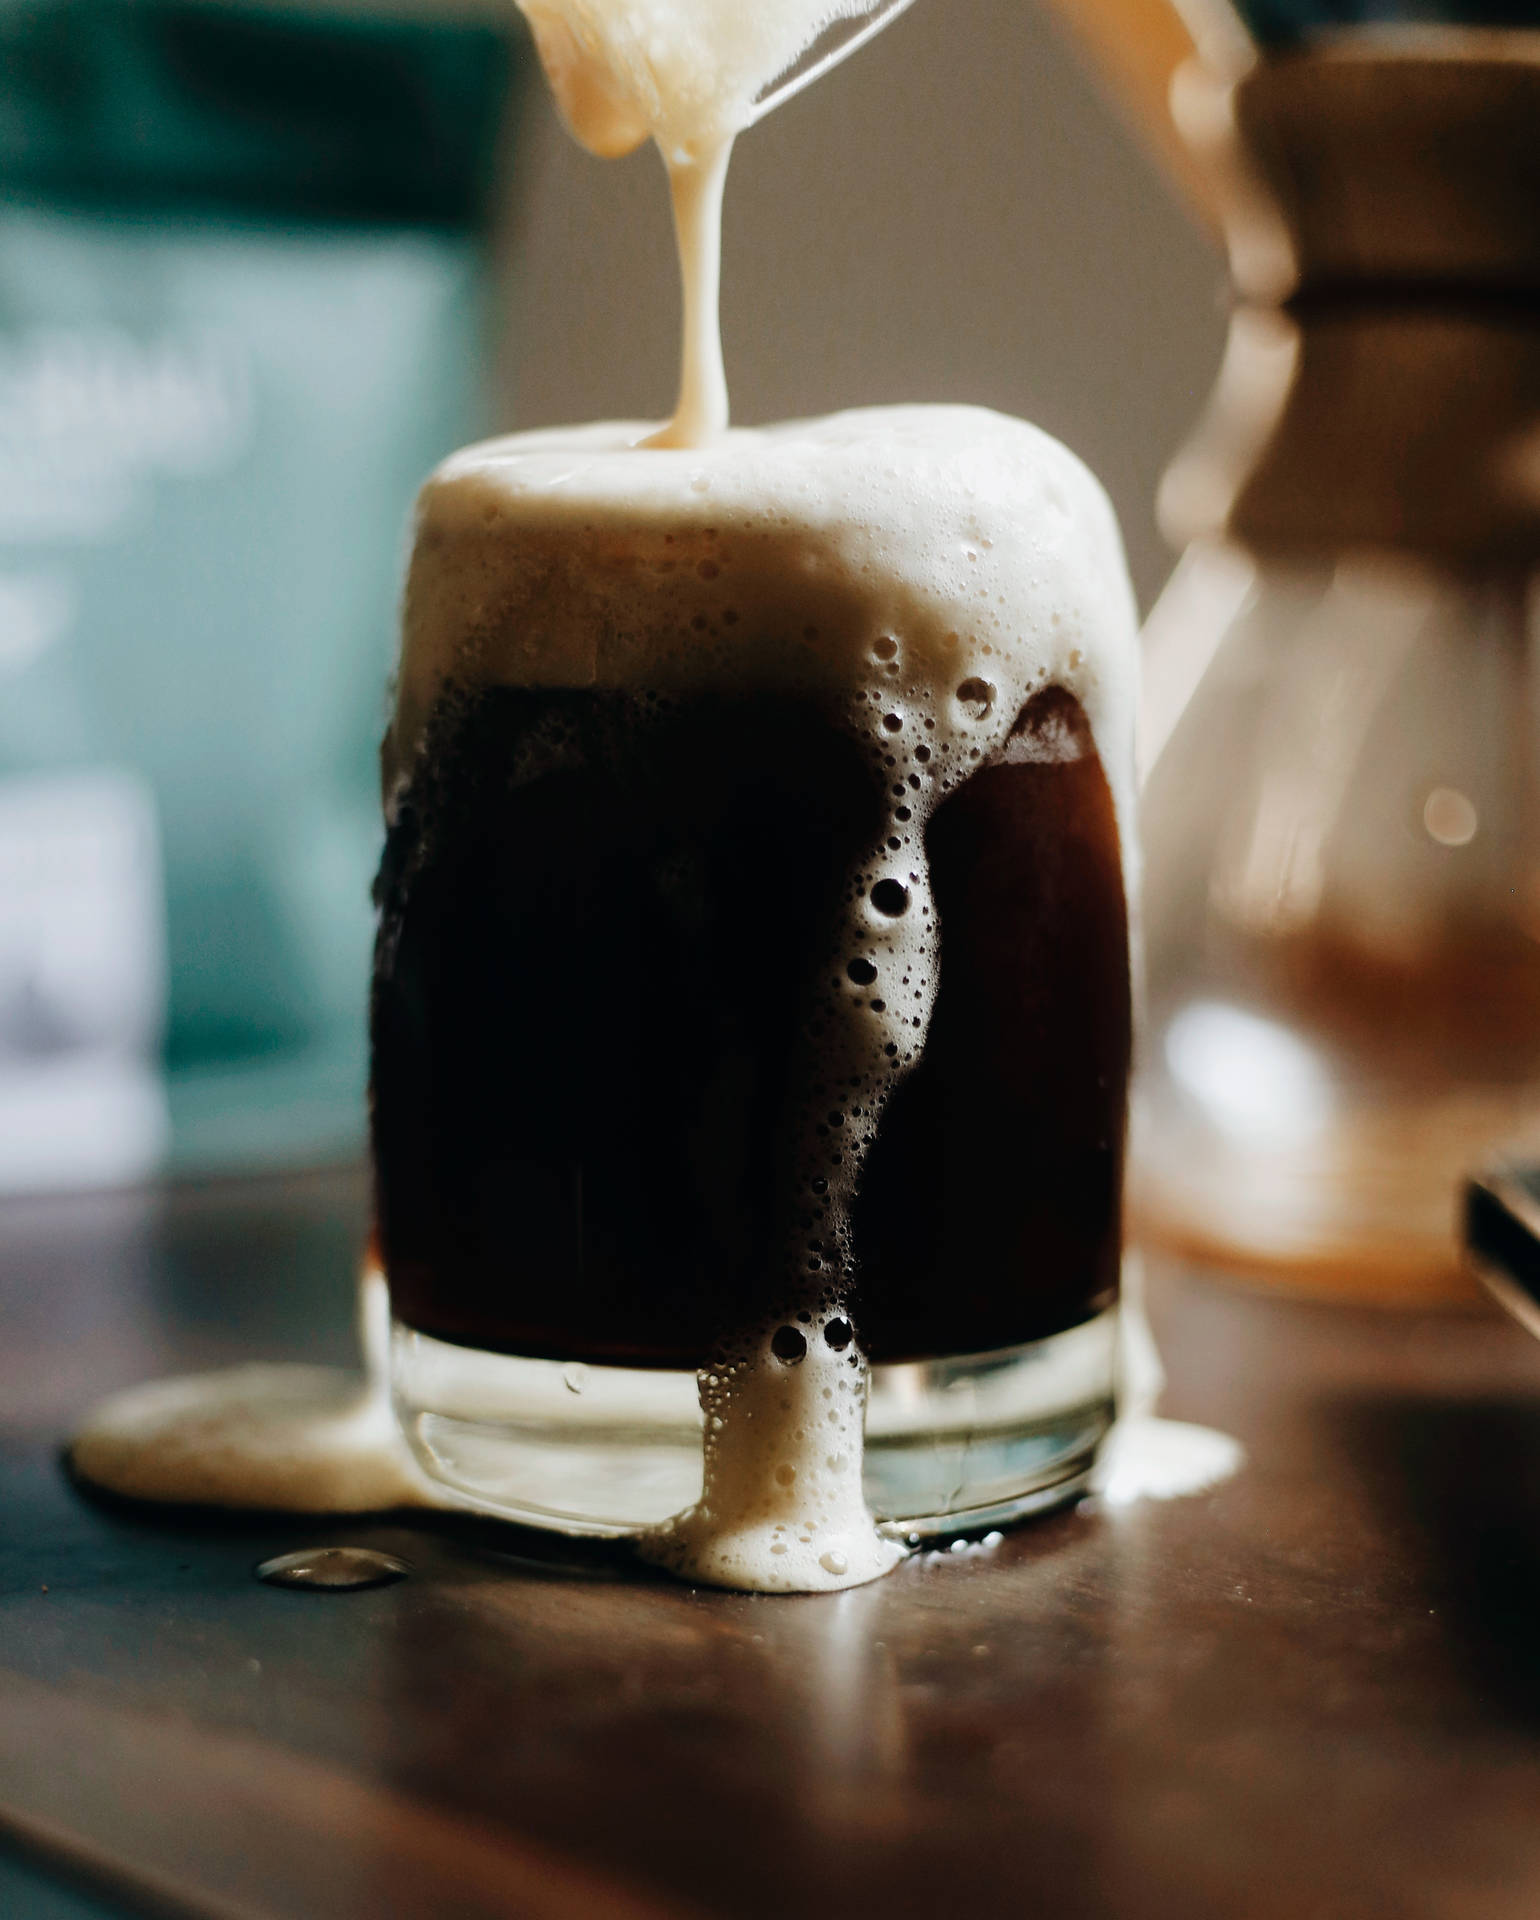 Stout Beer Glass